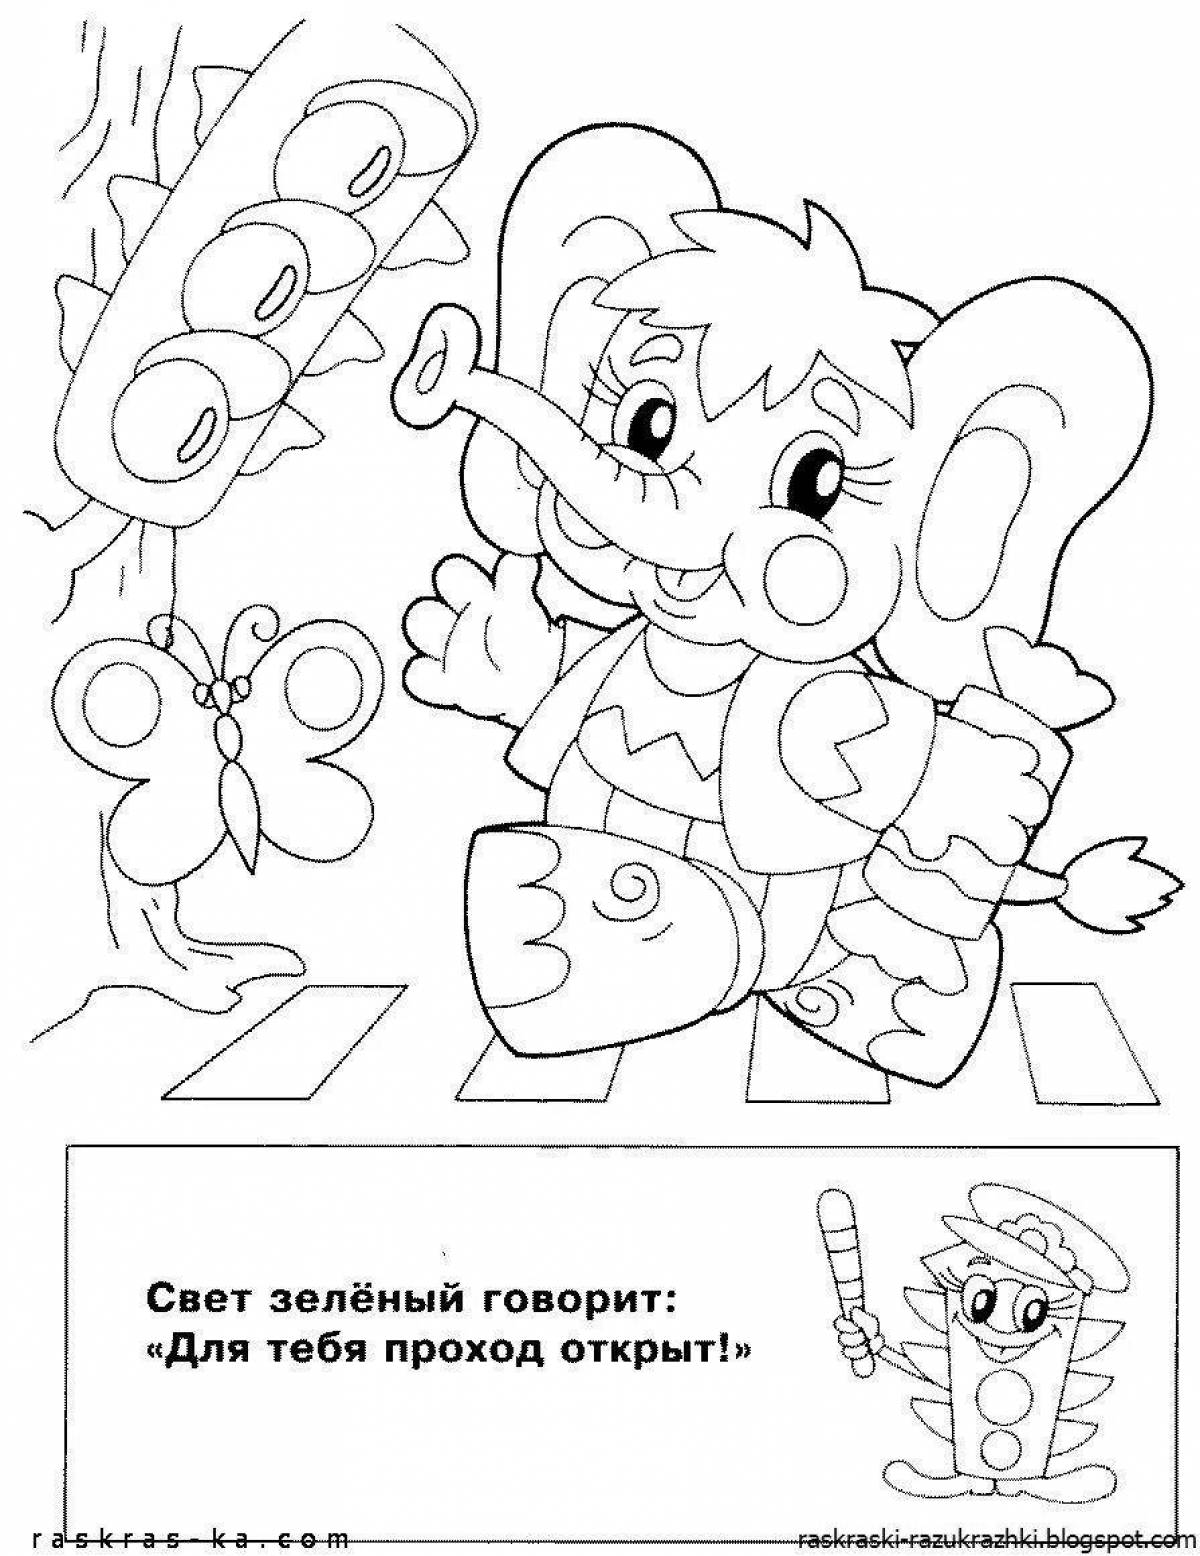 Drawings for kids traffic rules for kids #10